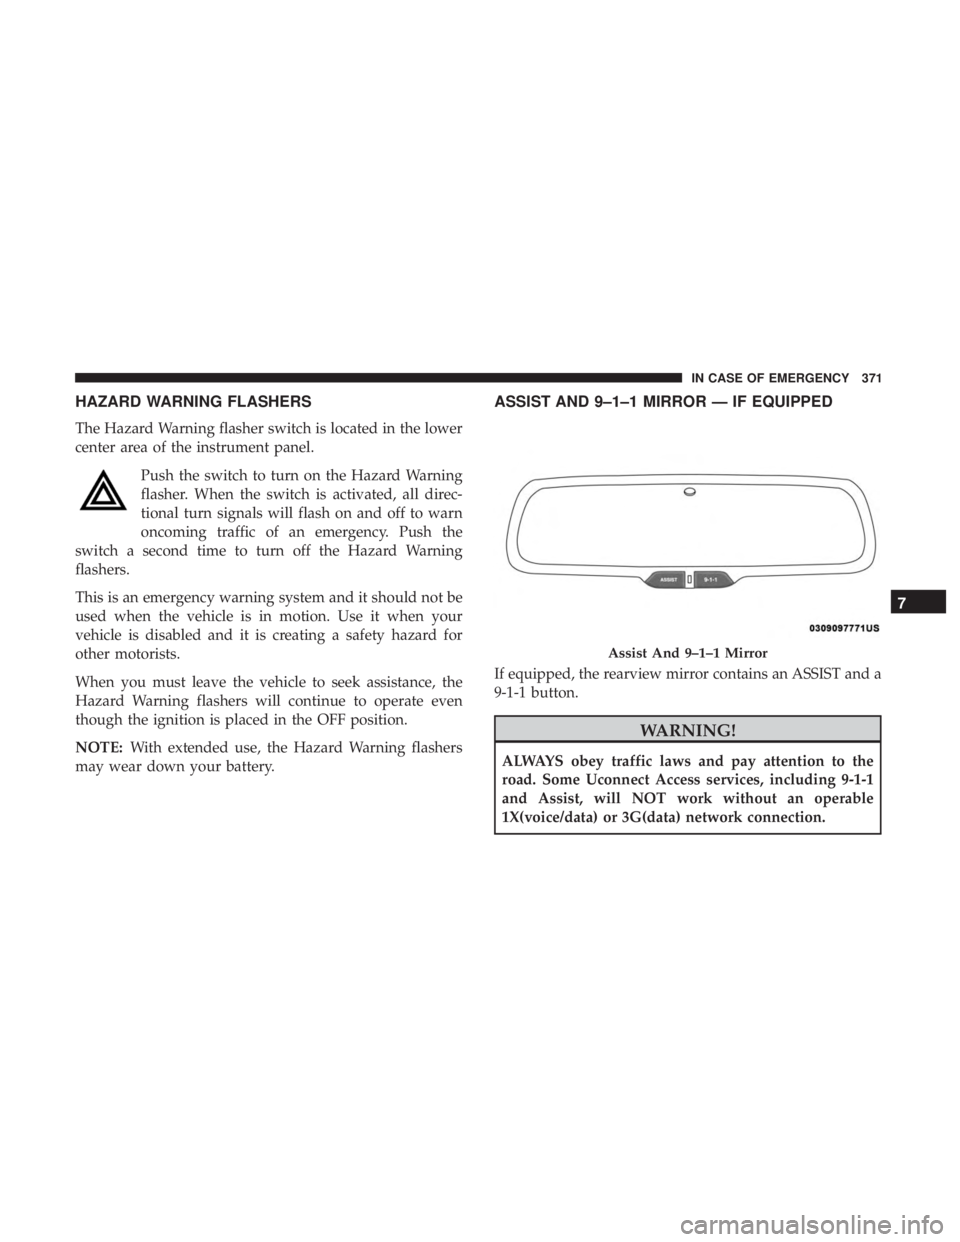 JEEP CHEROKEE LIMITED 2017  Owners Manual HAZARD WARNING FLASHERS
The Hazard Warning flasher switch is located in the lower
center area of the instrument panel.Push the switch to turn on the Hazard Warning
flasher. When the switch is activate